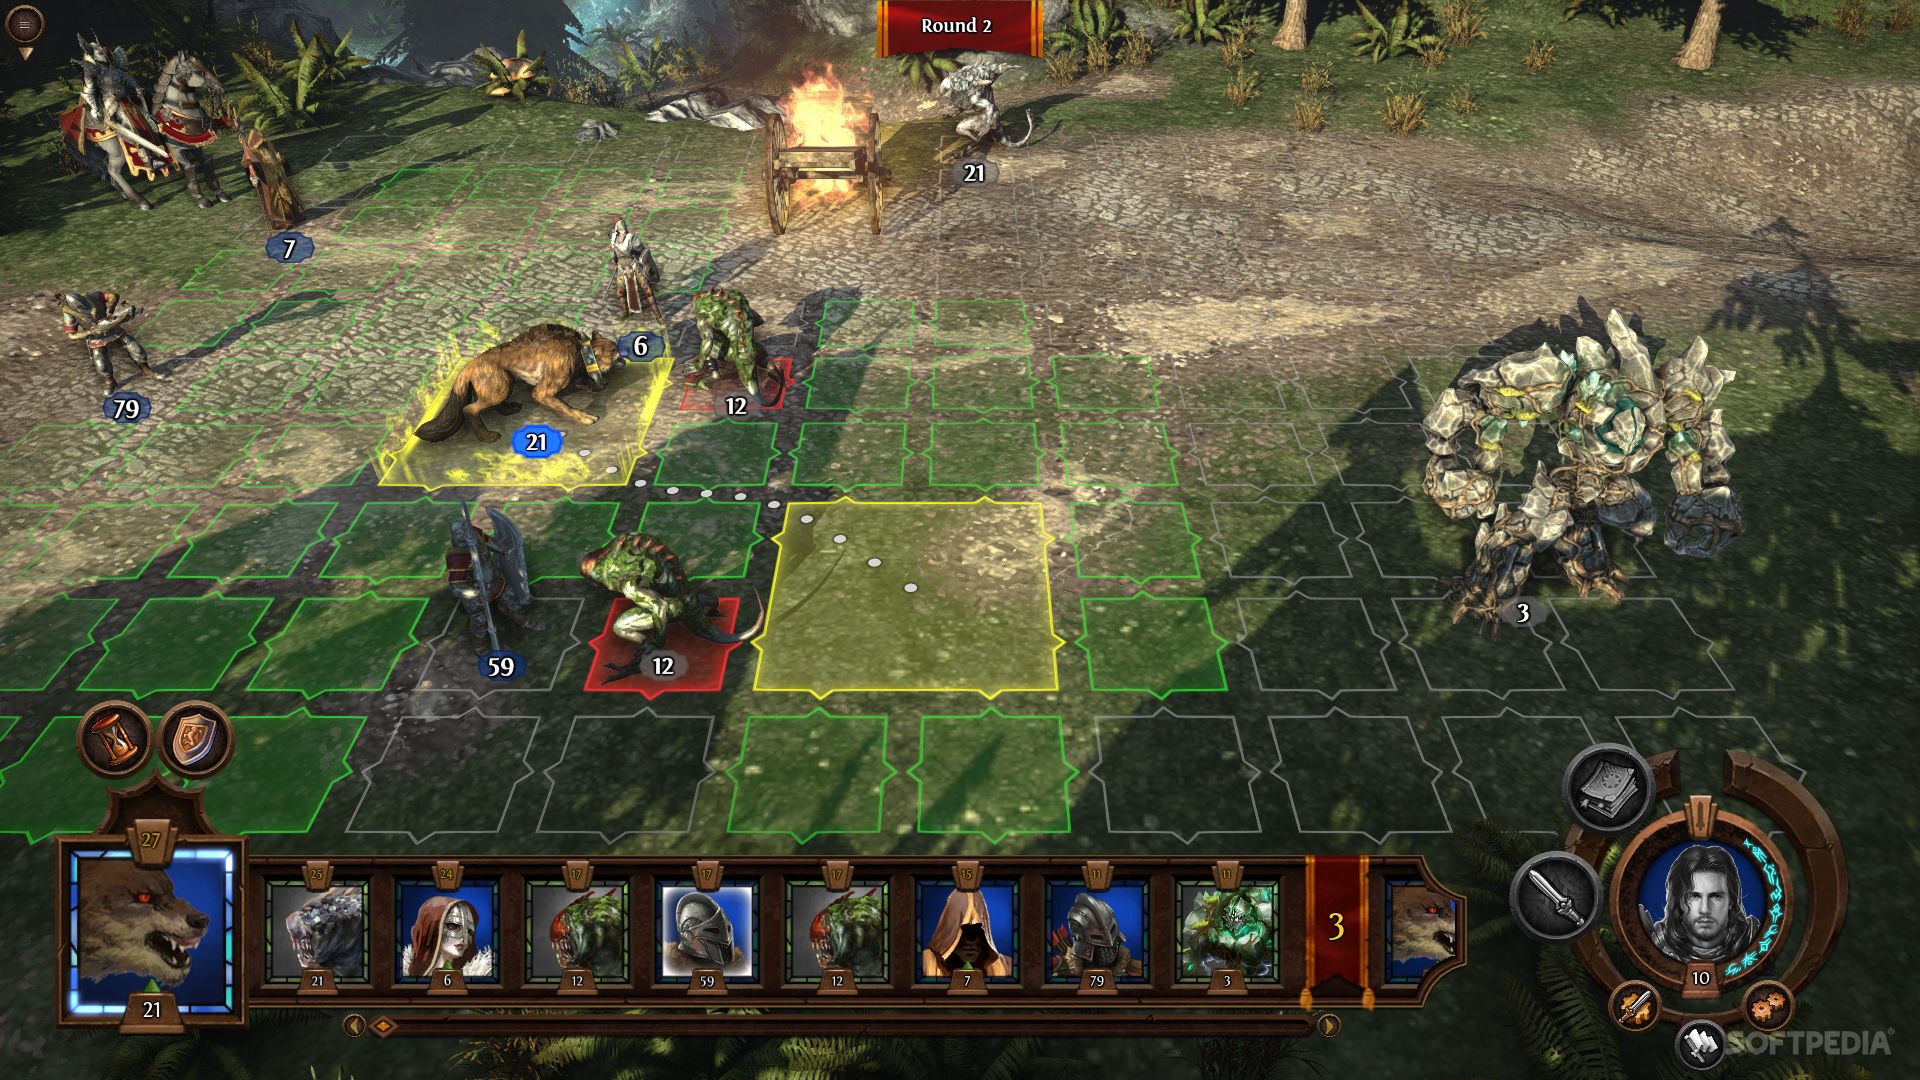 heroes of might and magic 7 vs age of wonders 3